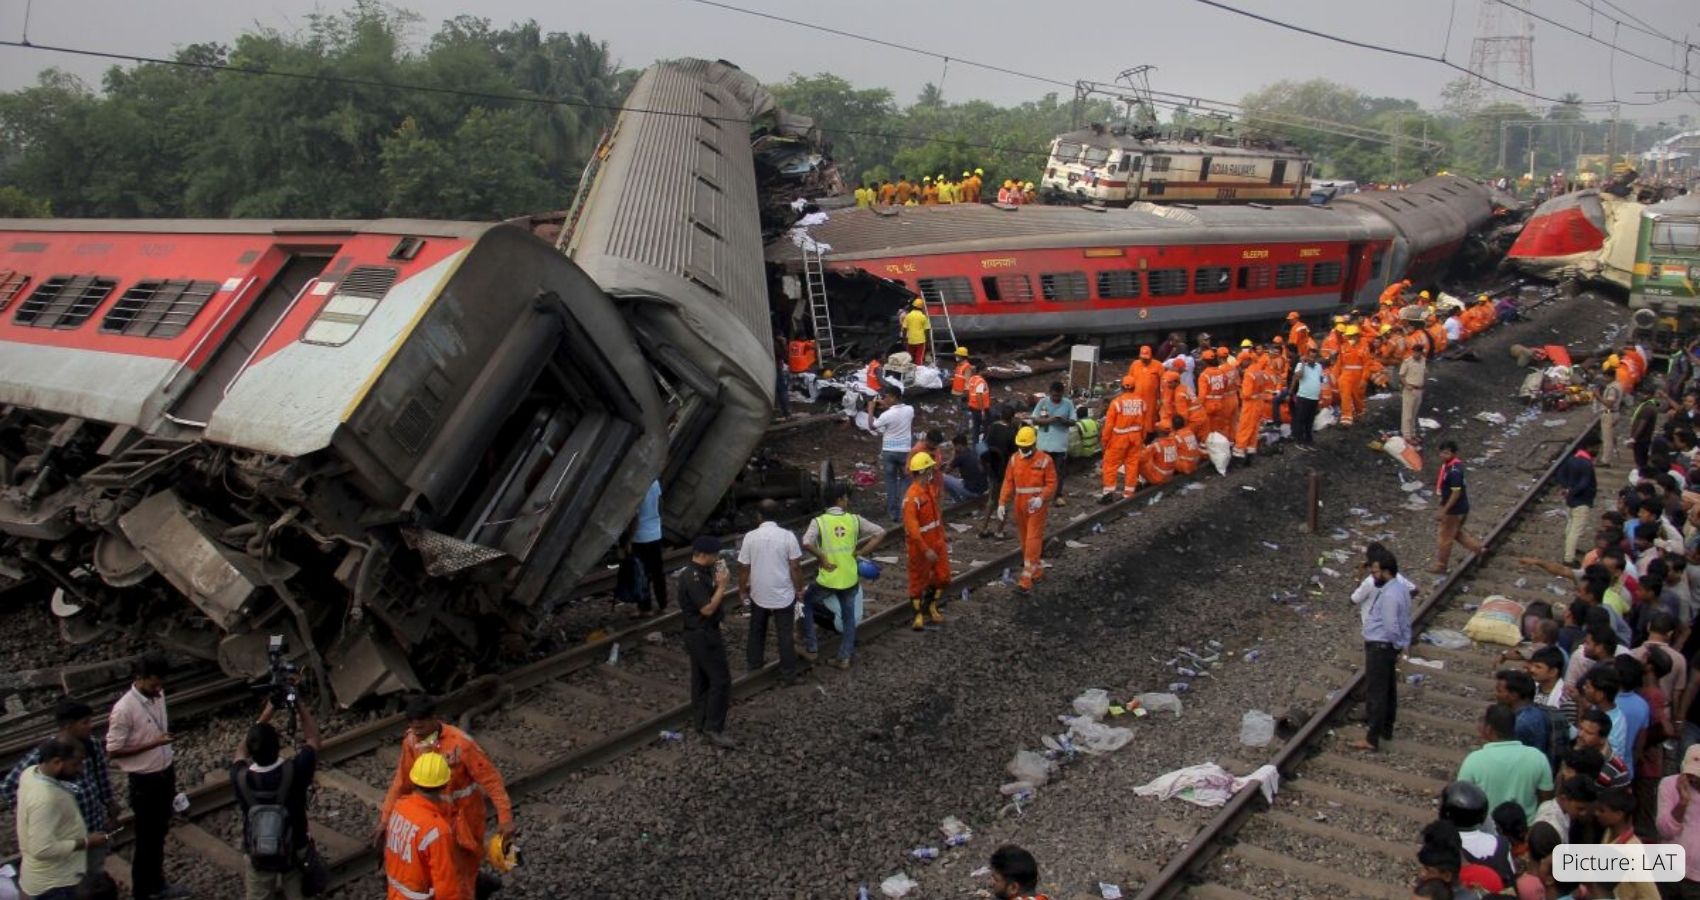 More Than 270 Dead and 900 Injured in Train Crash in India